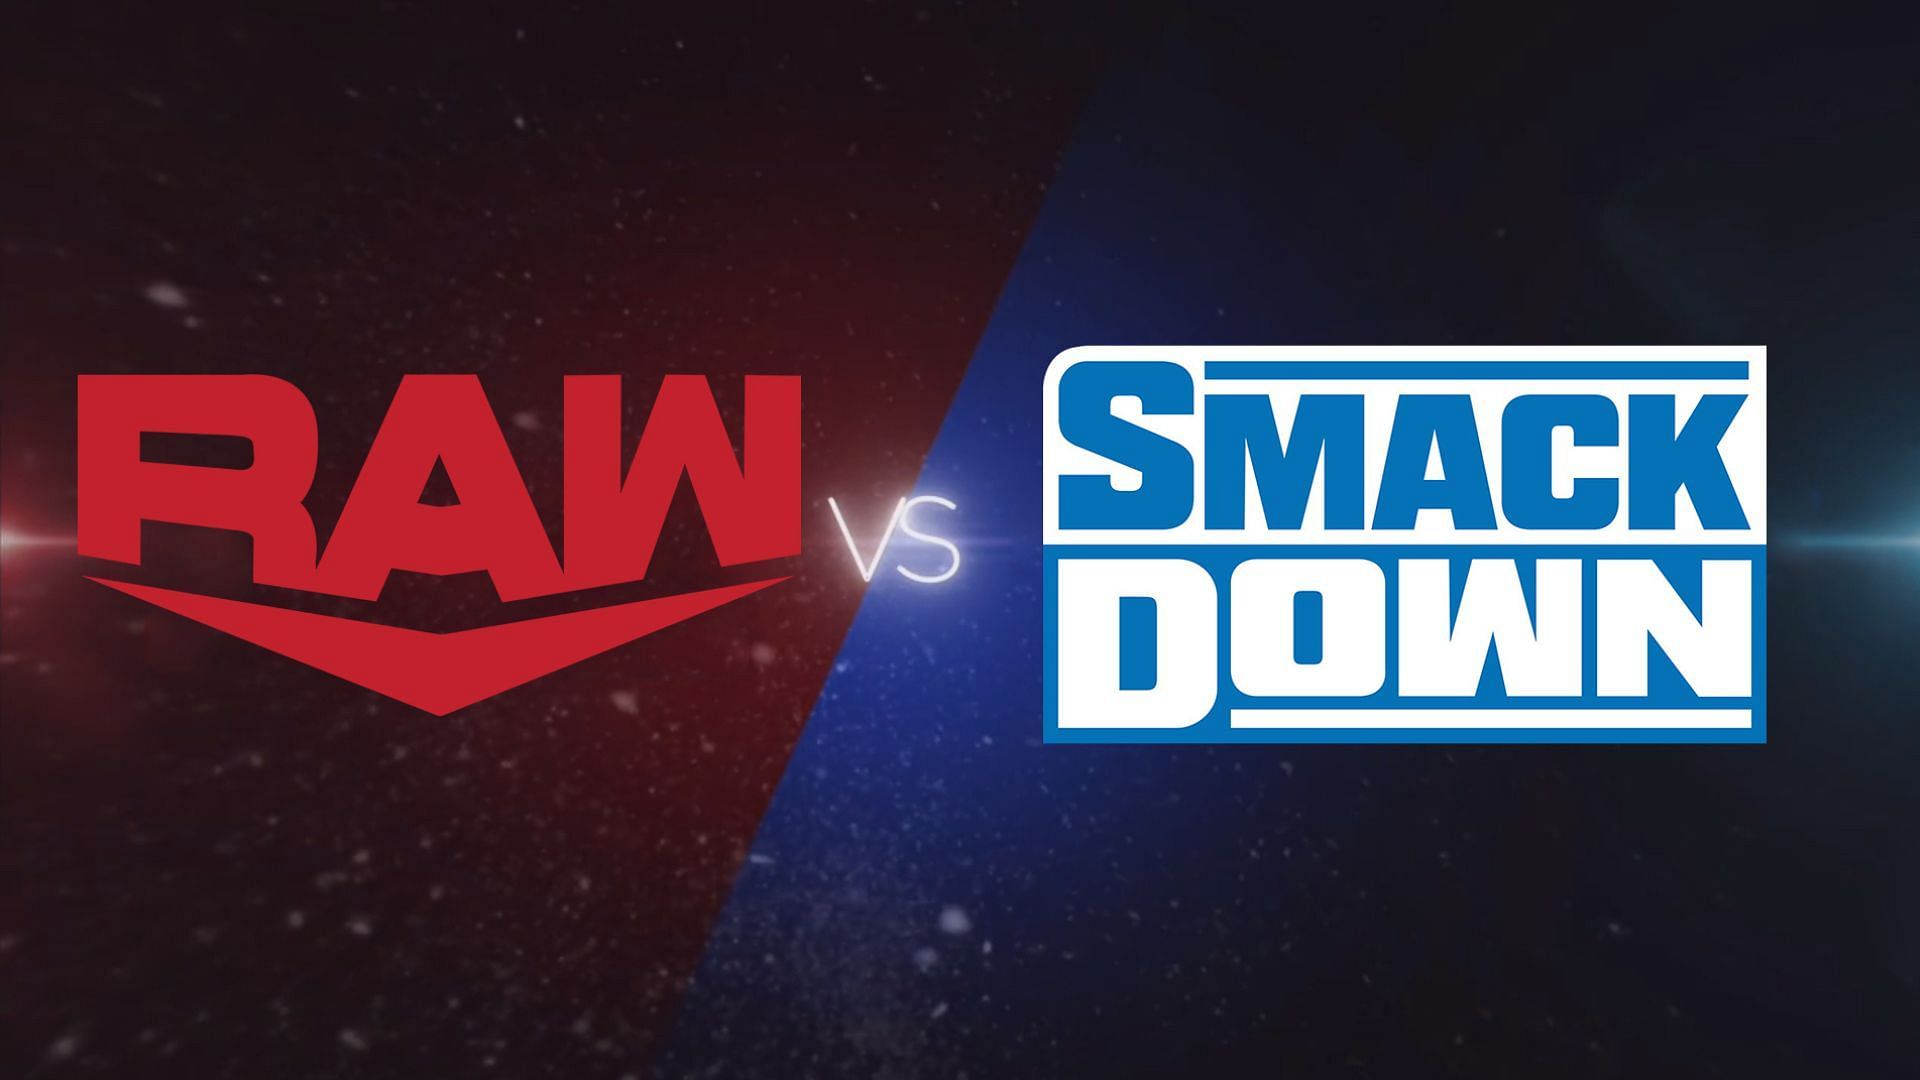 RAW and SmackDown are headed for WWE SummerSlam!